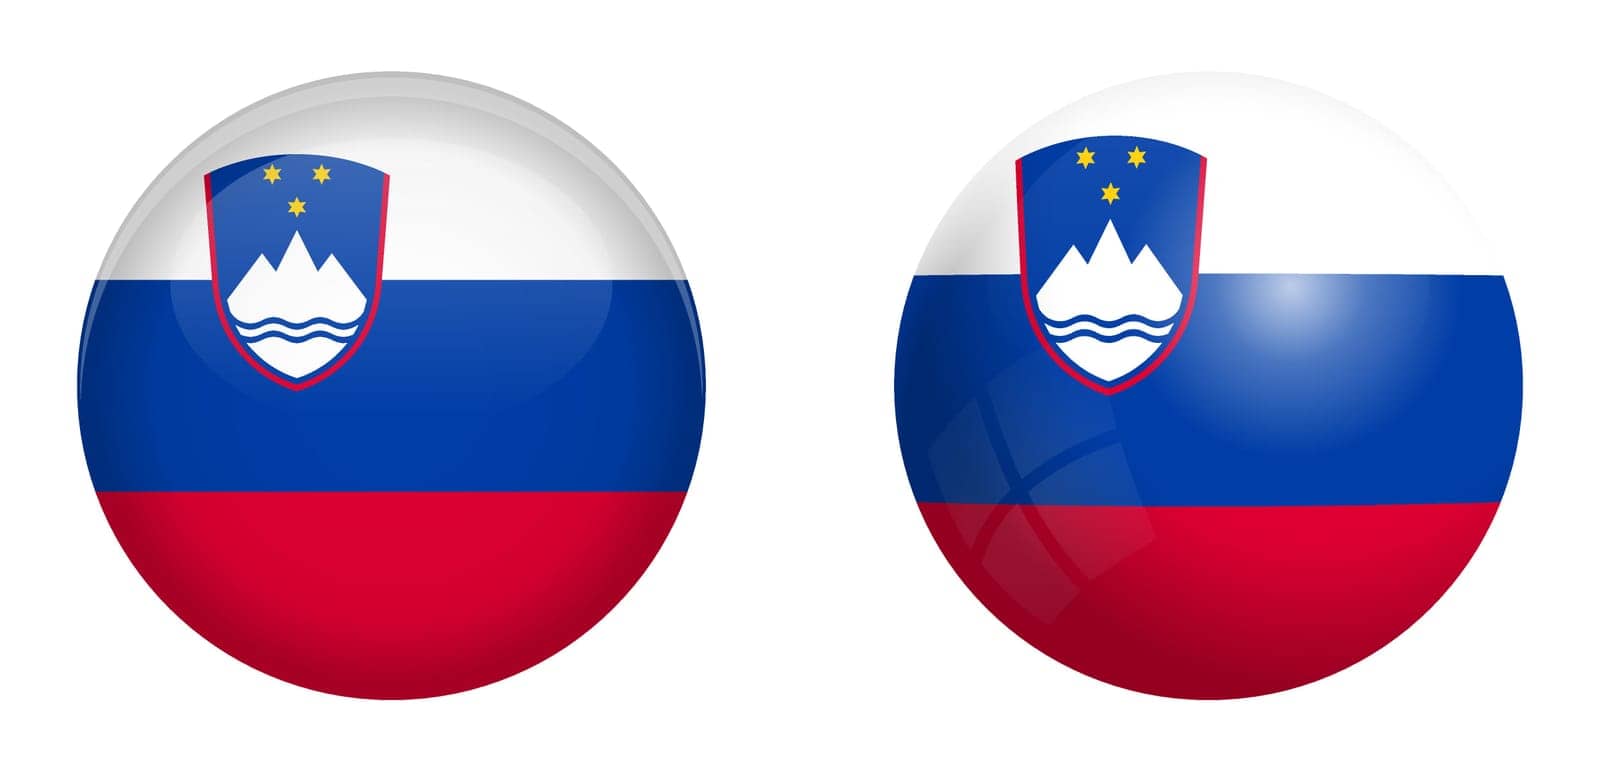 Slovenia flag under 3d dome button and on glossy sphere / ball. by Ivanko